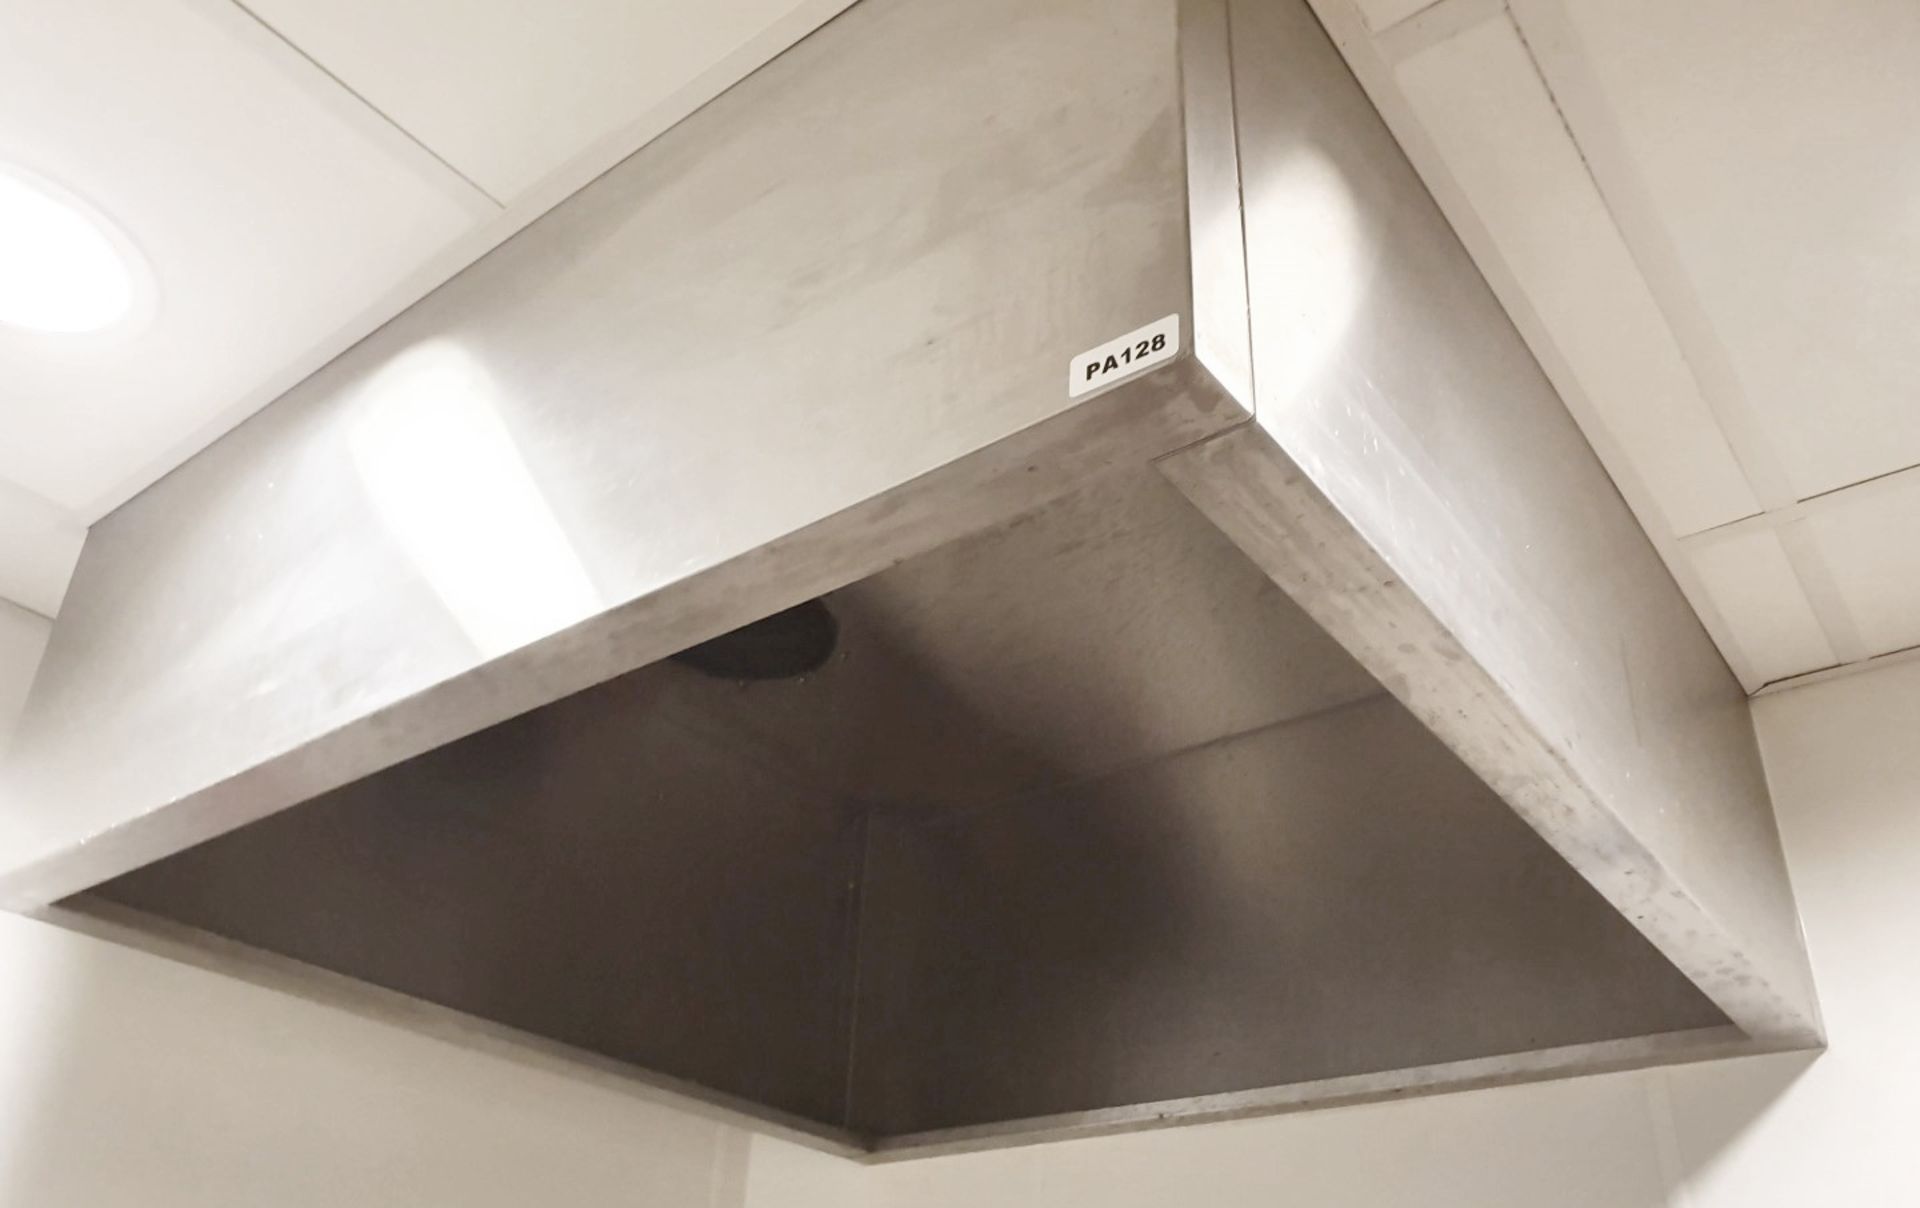 1 x Stainless Steel Extractor Canopy Hood - H46 x W110 x D110 cms - Ref PA128 - CL463 - Location: - Image 2 of 2